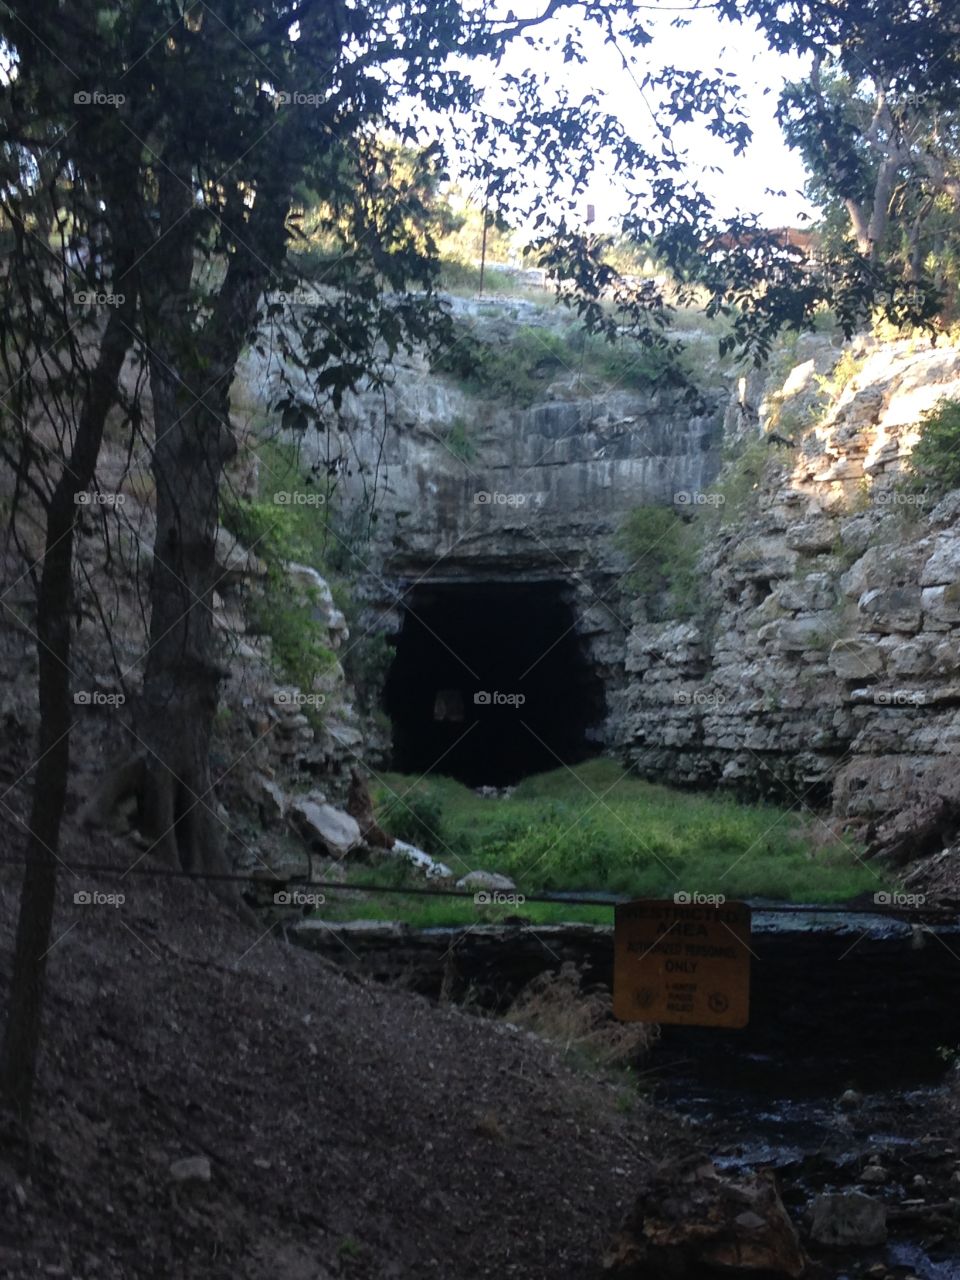 Mexican Free-Tailed Bat Cave. This cave is located in Fredericksburg, Tx. Thousands of Mexican Free-Tailed Bats migrate to this cave every summer. 